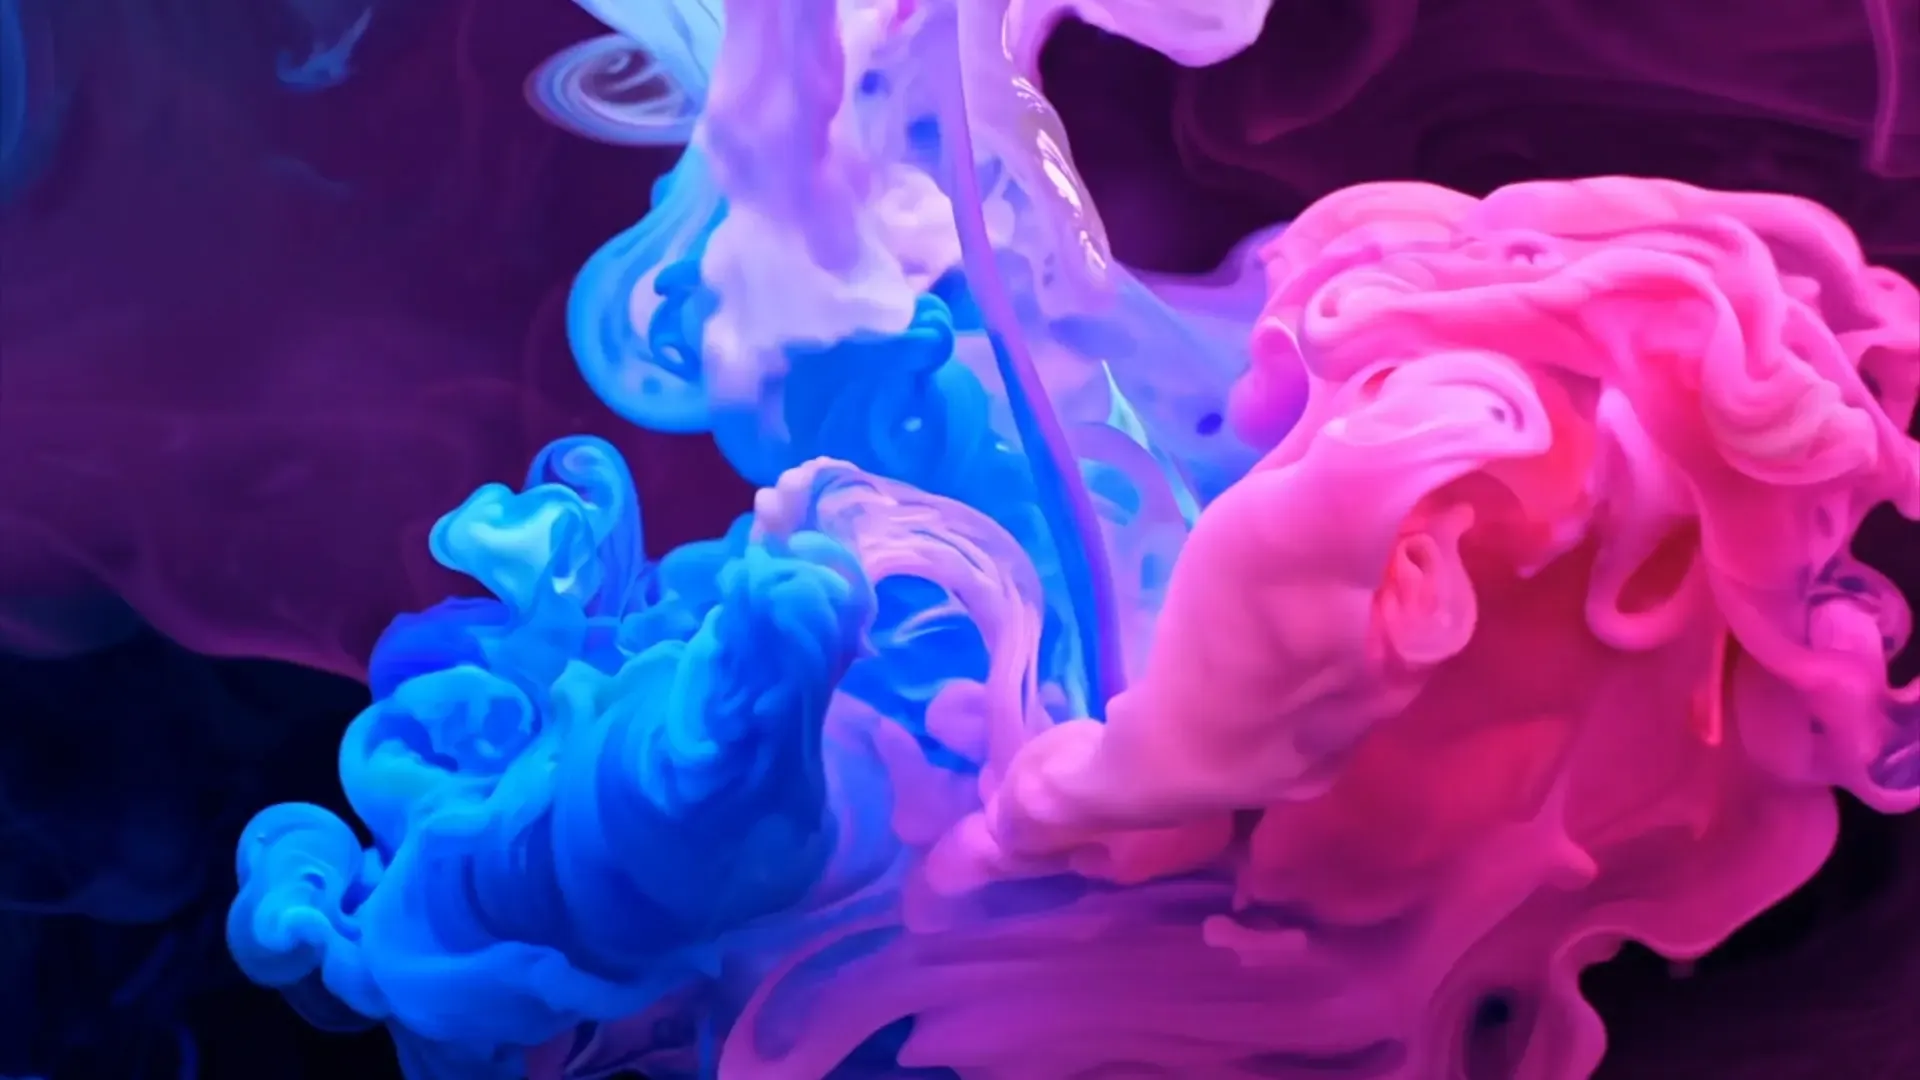 Colorful Smoke Explosion Transition Video for Creative Projects